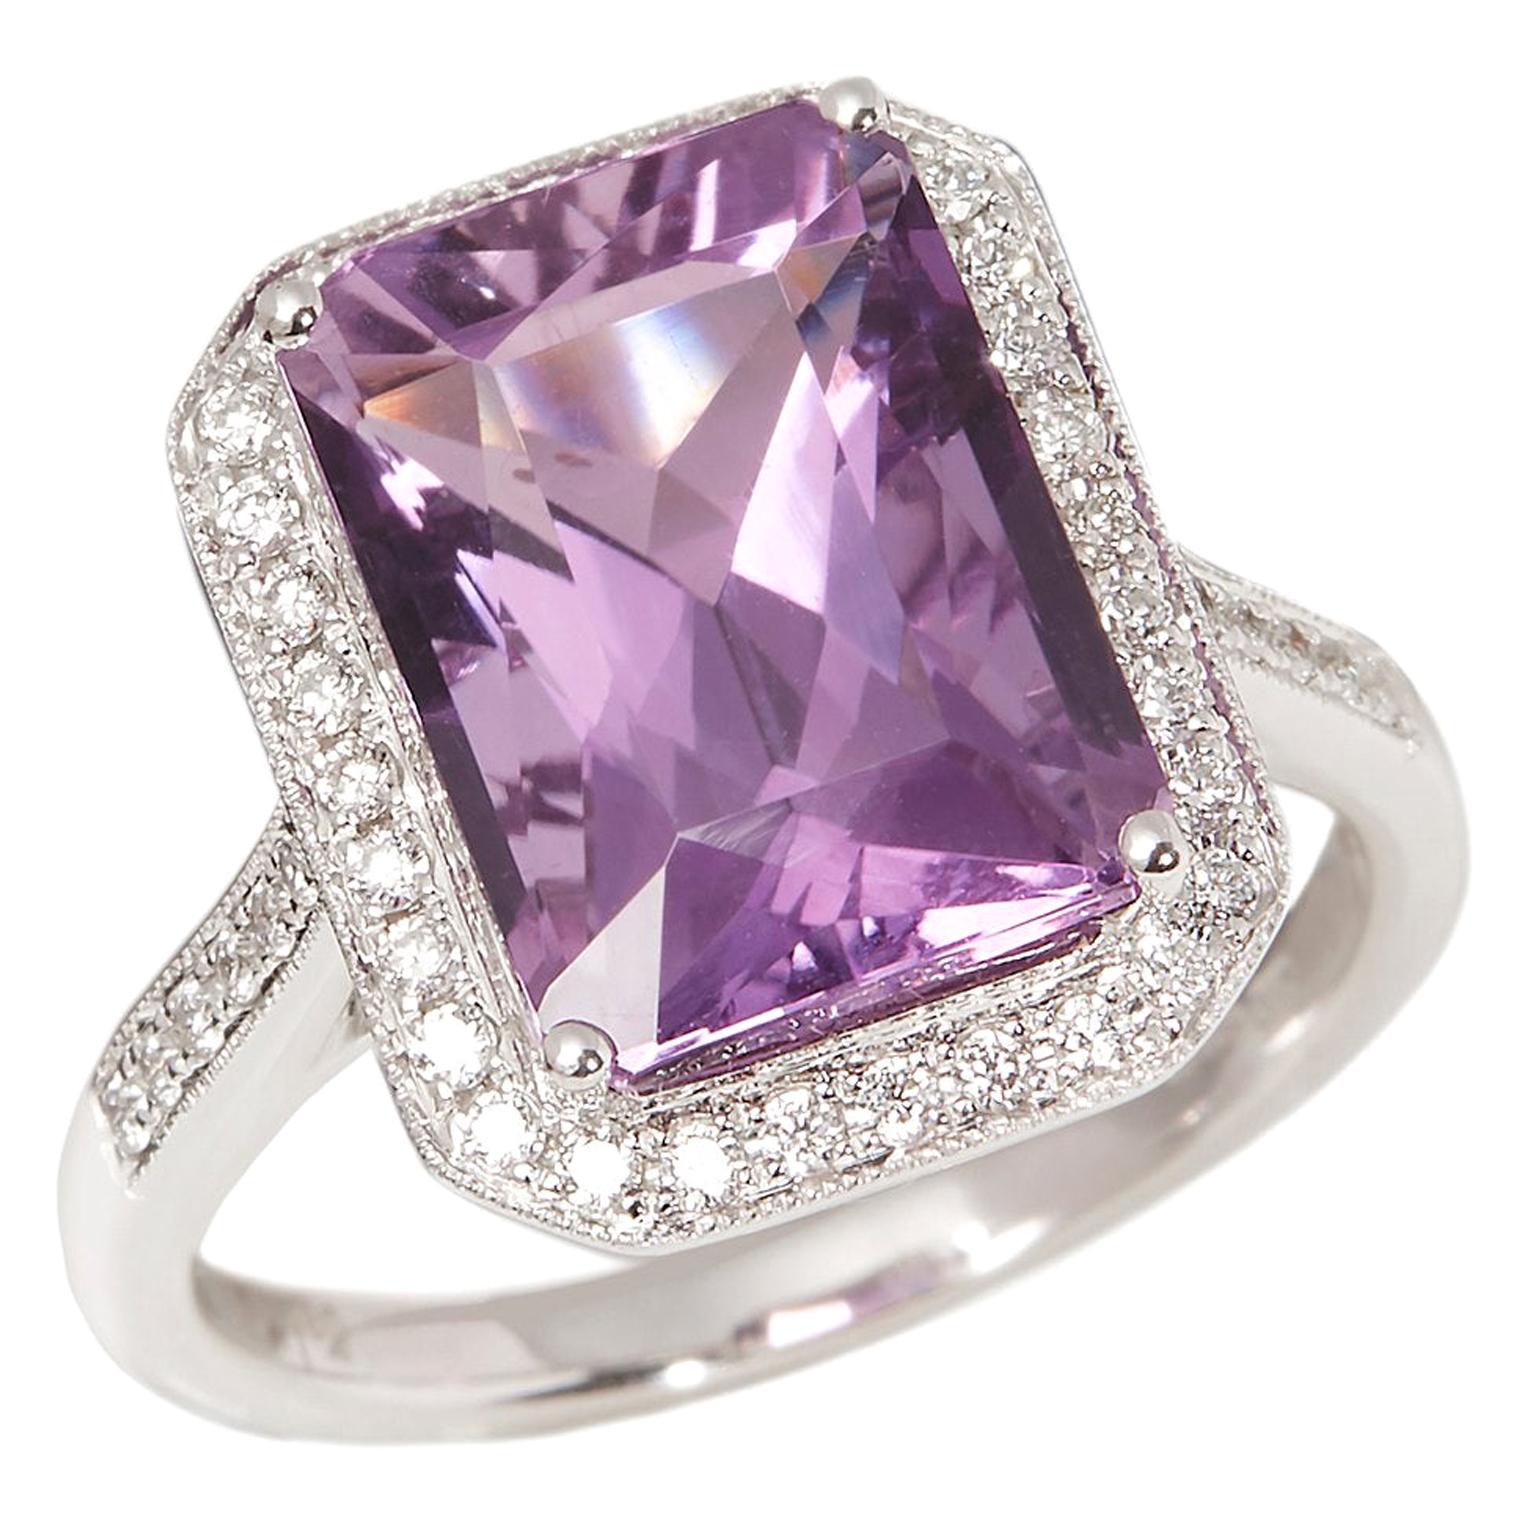 Certified 6.32ct Amethyst and Diamond 18ct Gold Ring